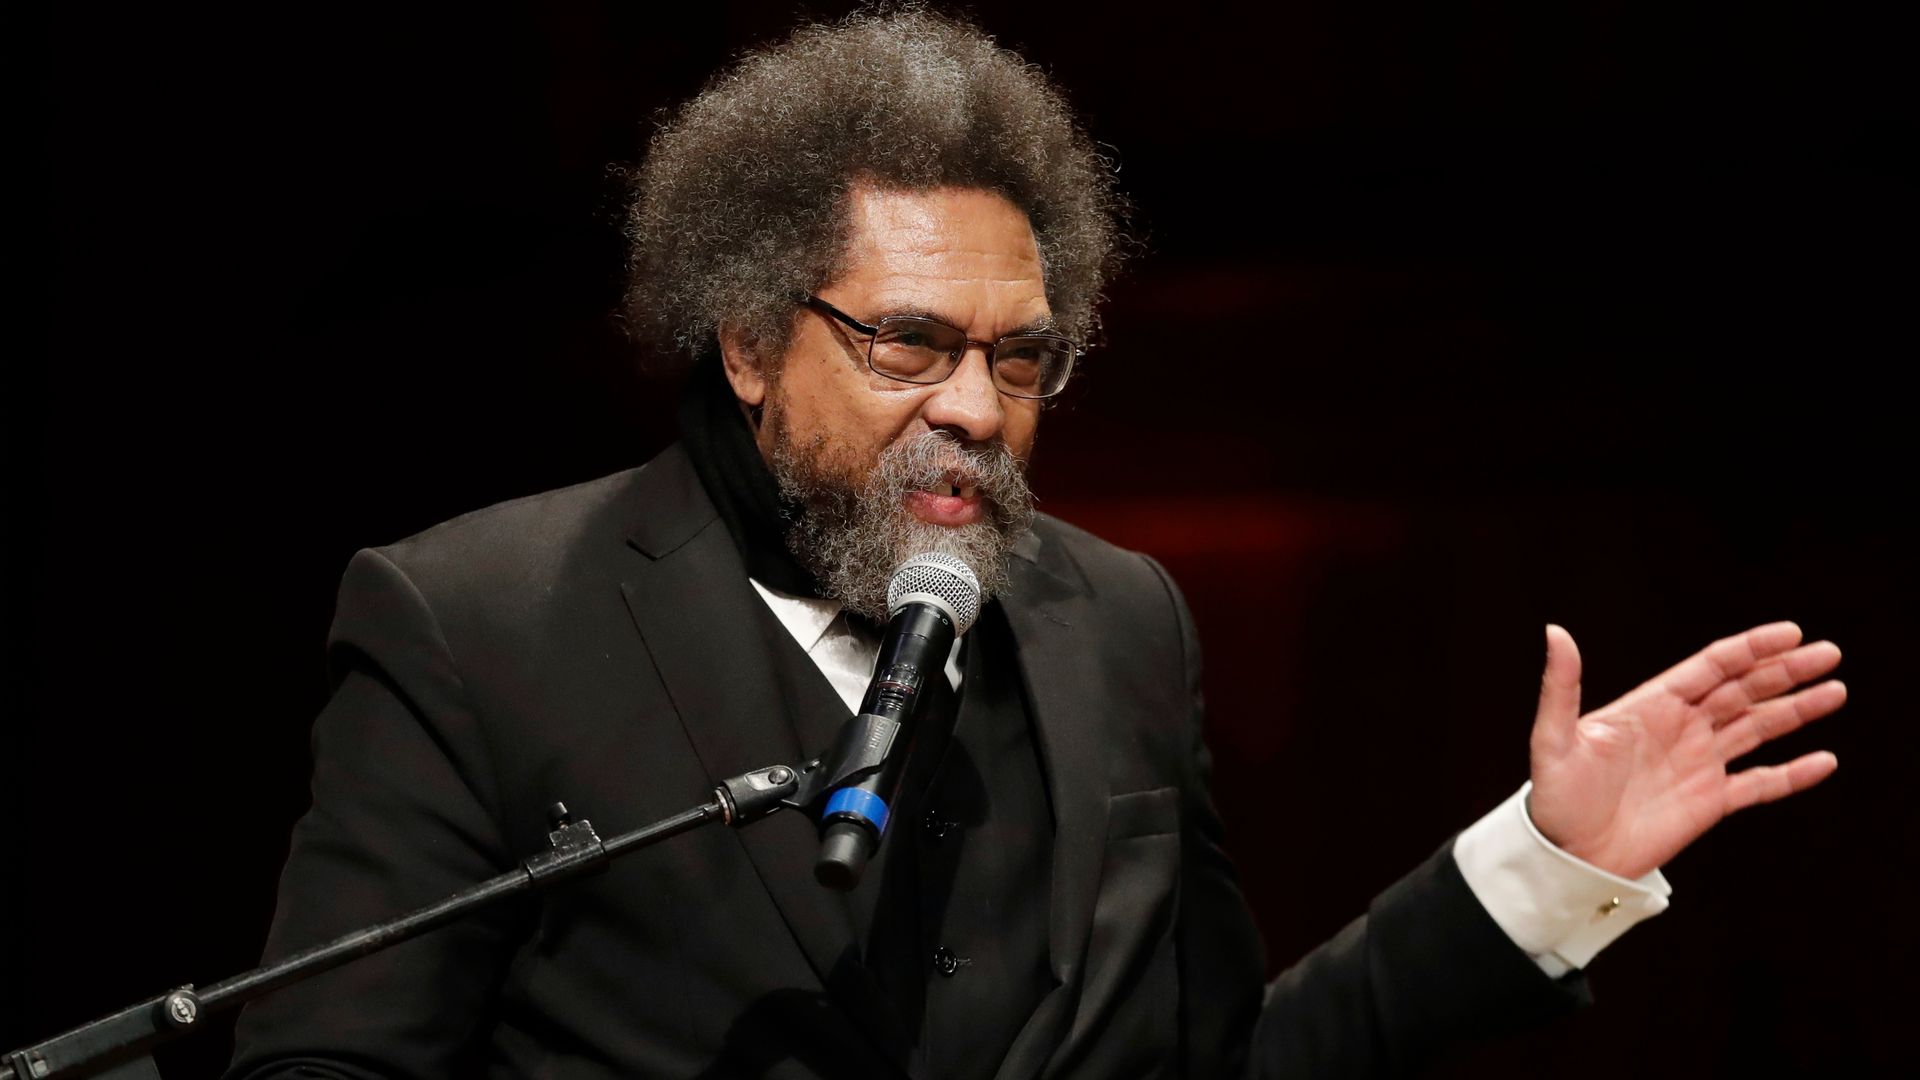 Cornel West's progressive candidacy could divide the Democratic vote, potentially leading to an impact similar to voting for Trump.